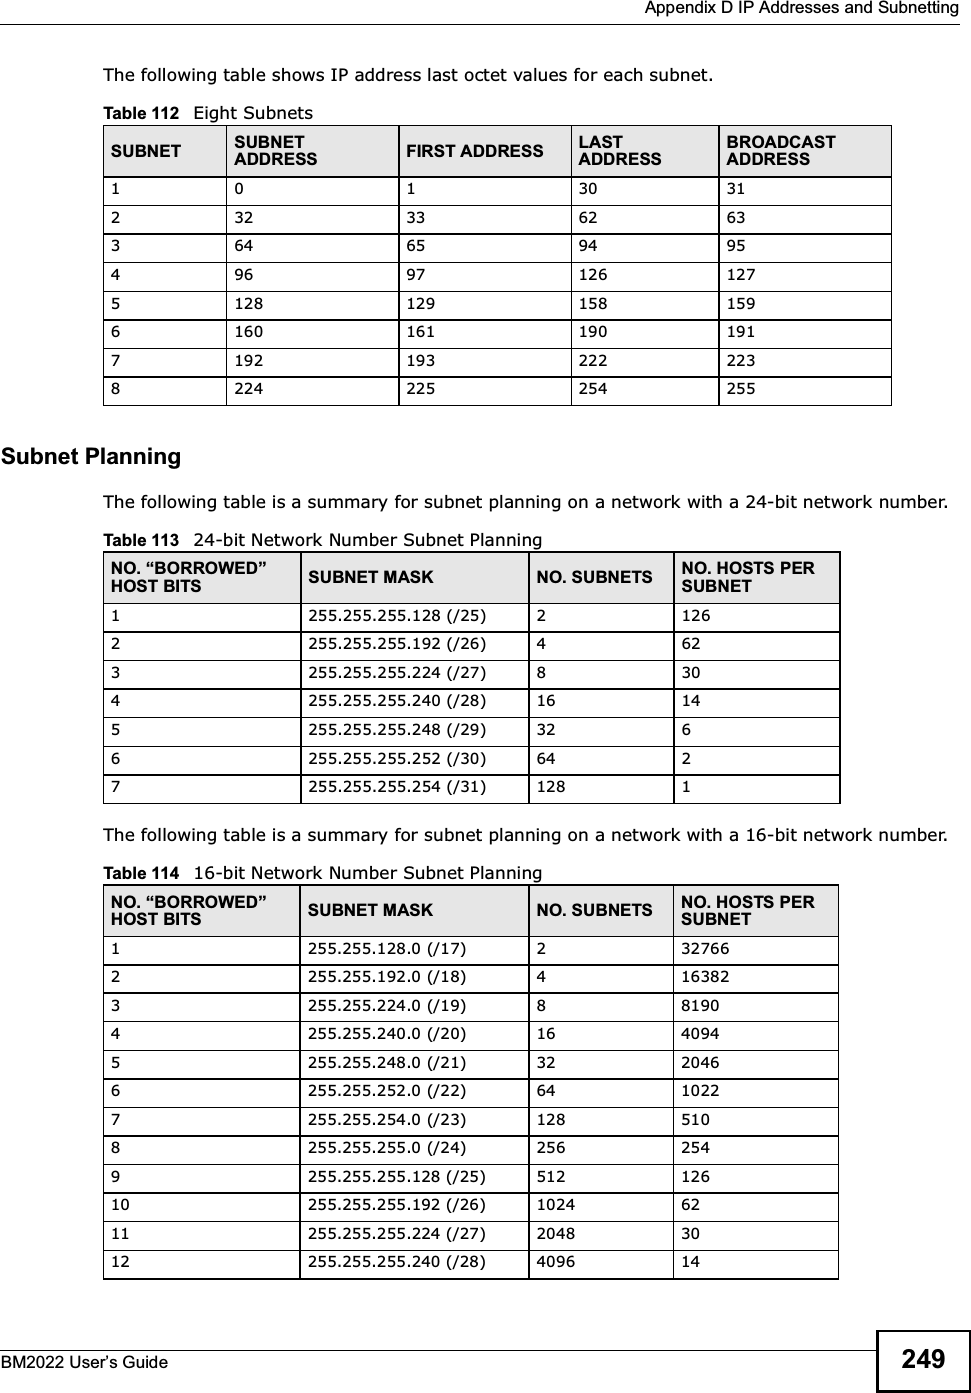  Appendix D IP Addresses and SubnettingBM2022 Users Guide 249The following table shows IP address last octet values for each subnet.Subnet PlanningThe following table is a summary for subnet planning on a network with a 24-bit network number.The following table is a summary for subnet planning on a network with a 16-bit network number. Table 112   Eight SubnetsSUBNET SUBNET ADDRESS FIRST ADDRESS LAST ADDRESSBROADCAST ADDRESS1 0 1 30 312 32 33 62 633 64 65 94 954 96 97 126 1275 128 129 158 1596 160 161 190 1917 192 193 222 2238 224 225 254 255Table 113   24-bit Network Number Subnet PlanningNO. BORROWED HOST BITS SUBNET MASK NO. SUBNETS NO. HOSTS PER SUBNET1255.255.255.128 (/25) 2 1262255.255.255.192 (/26) 4 623255.255.255.224 (/27) 8 304255.255.255.240 (/28) 16 145255.255.255.248 (/29) 32 66255.255.255.252 (/30) 64 27255.255.255.254 (/31) 128 1Table 114   16-bit Network Number Subnet PlanningNO. BORROWED HOST BITS SUBNET MASK NO. SUBNETS NO. HOSTS PER SUBNET1255.255.128.0 (/17) 2 327662255.255.192.0 (/18) 4 163823255.255.224.0 (/19) 8 81904255.255.240.0 (/20) 16 40945255.255.248.0 (/21) 32 20466255.255.252.0 (/22) 64 10227255.255.254.0 (/23) 128 5108255.255.255.0 (/24) 256 2549255.255.255.128 (/25) 512 12610 255.255.255.192 (/26) 1024 6211 255.255.255.224 (/27) 2048 3012 255.255.255.240 (/28) 4096 14